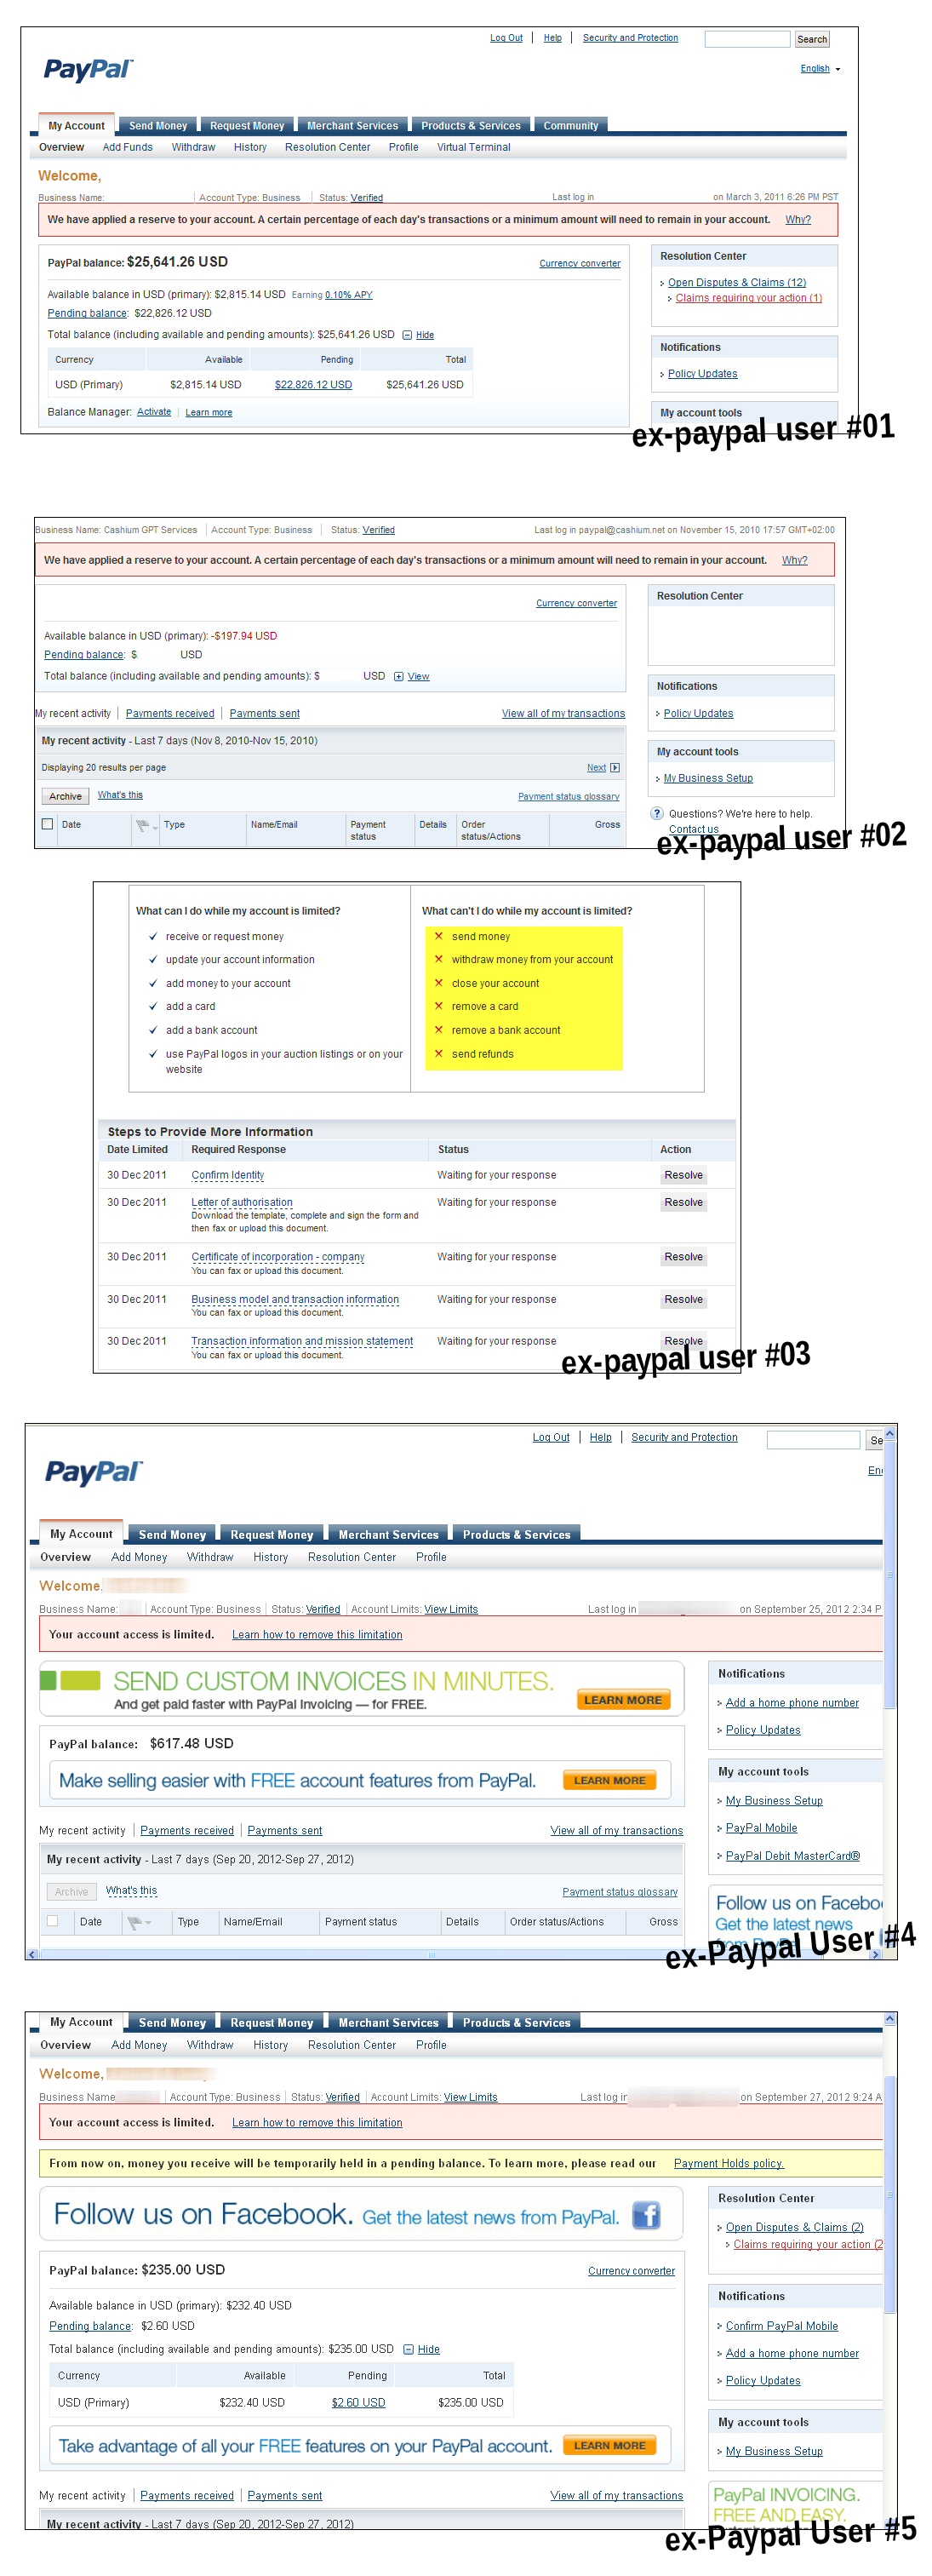 Both Frozen Paypal and Limited Paypal.com User Accounts ( Paypal 2013 Is a Bank )